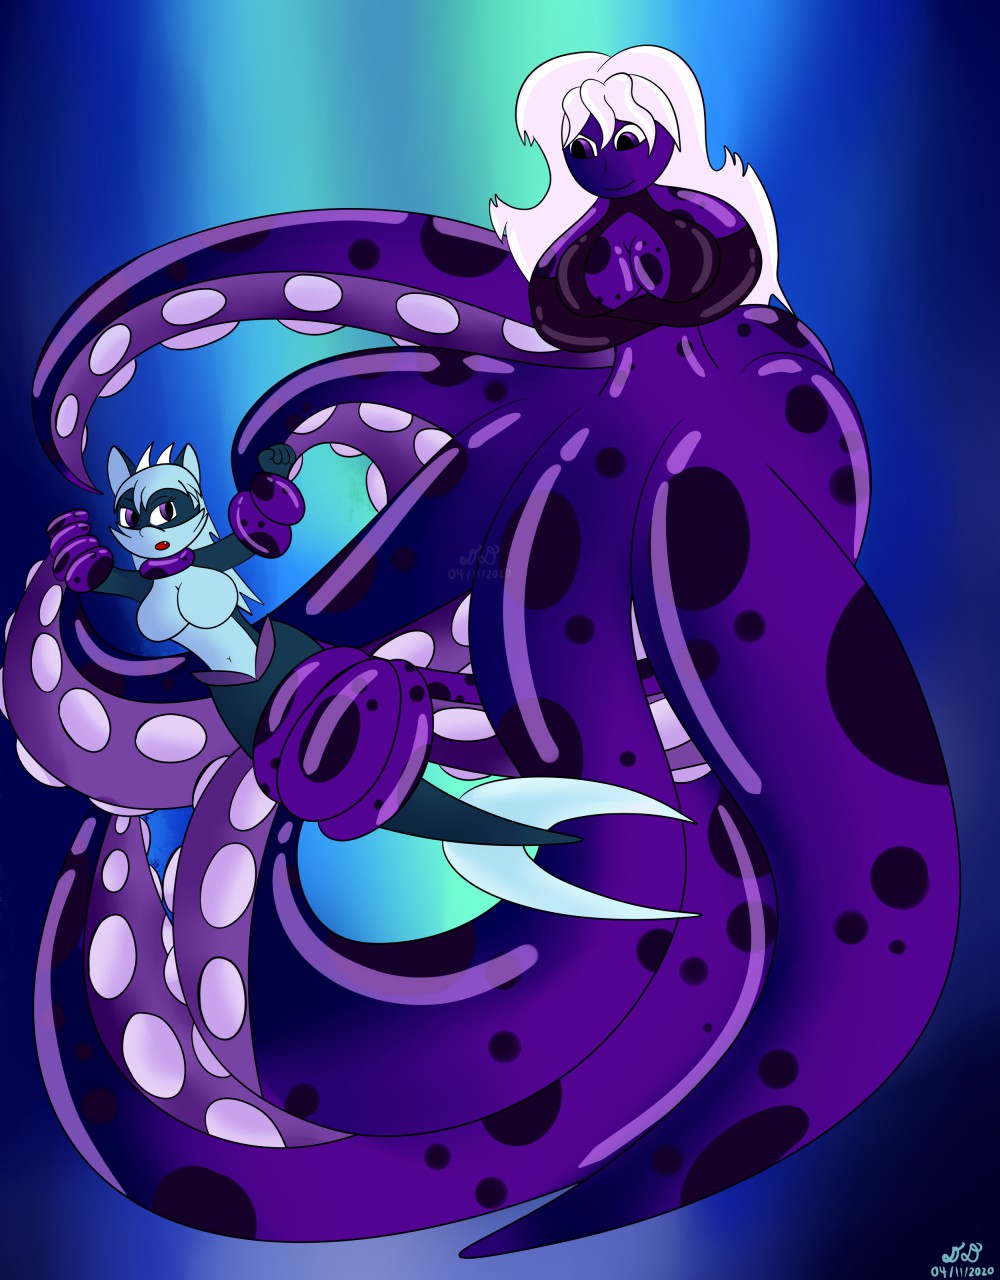 Octopus tentacle by Anbeads on DeviantArt